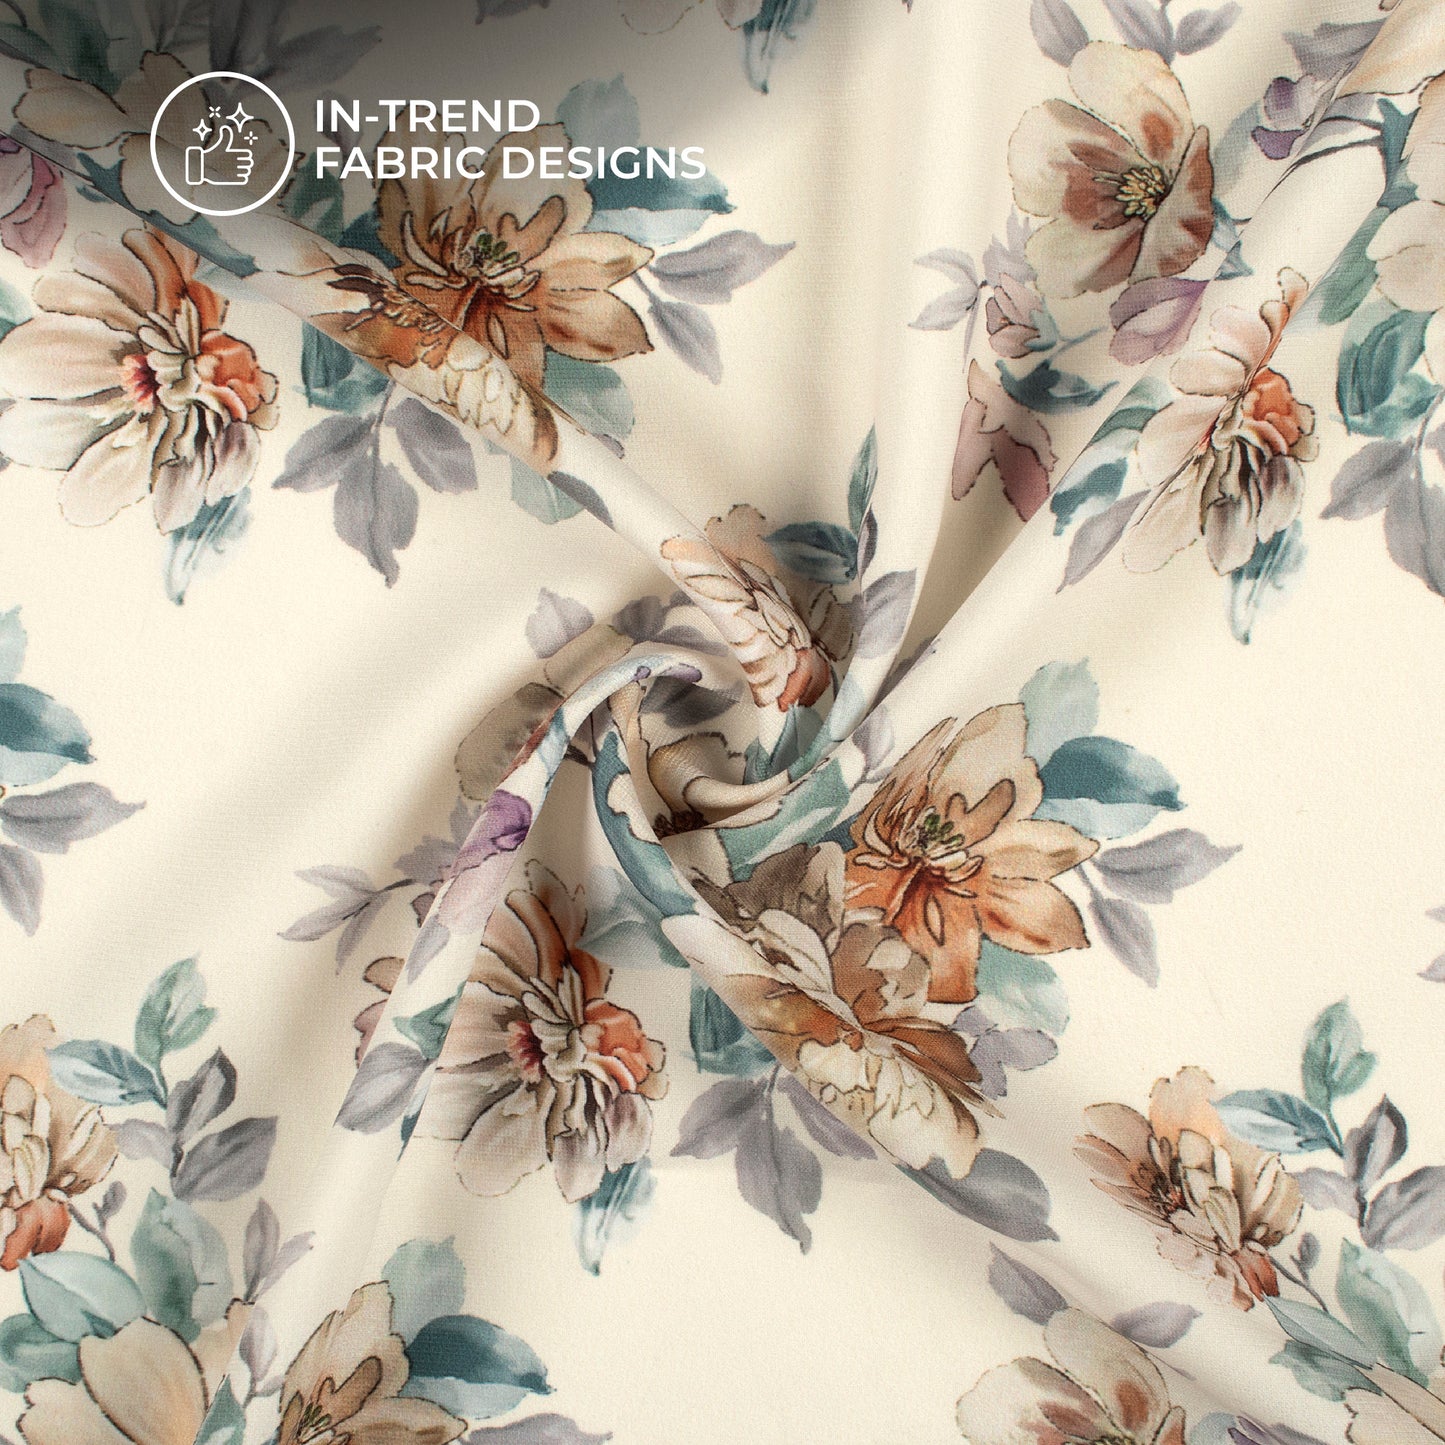 Attractive Off-White Floral Digital Print BSY Crepe Fabric